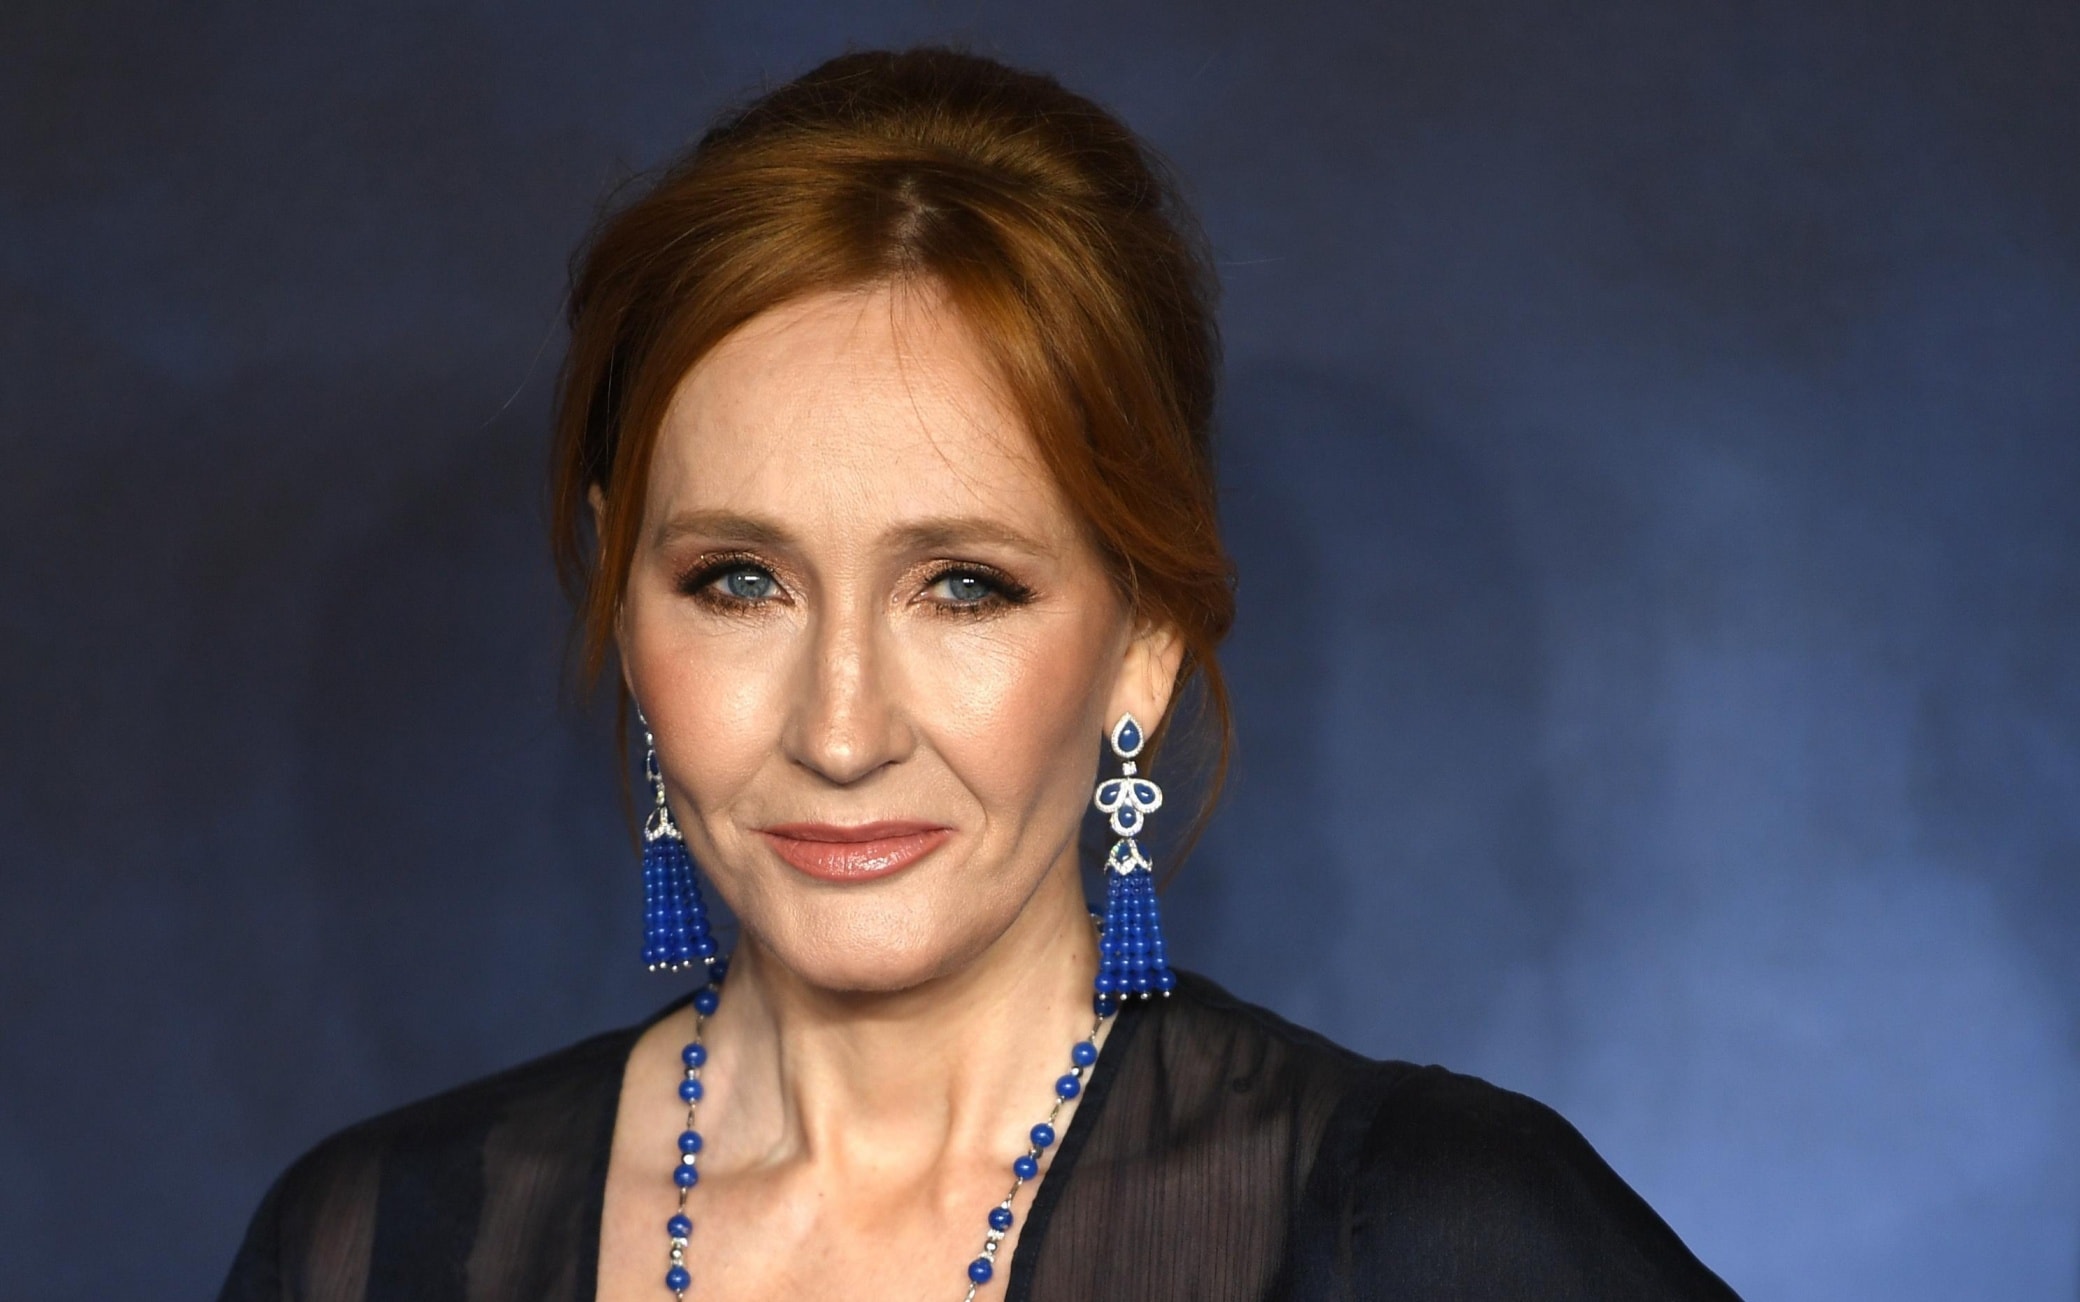 JK Rowling accuses transgender rights activists: “My address posted online”